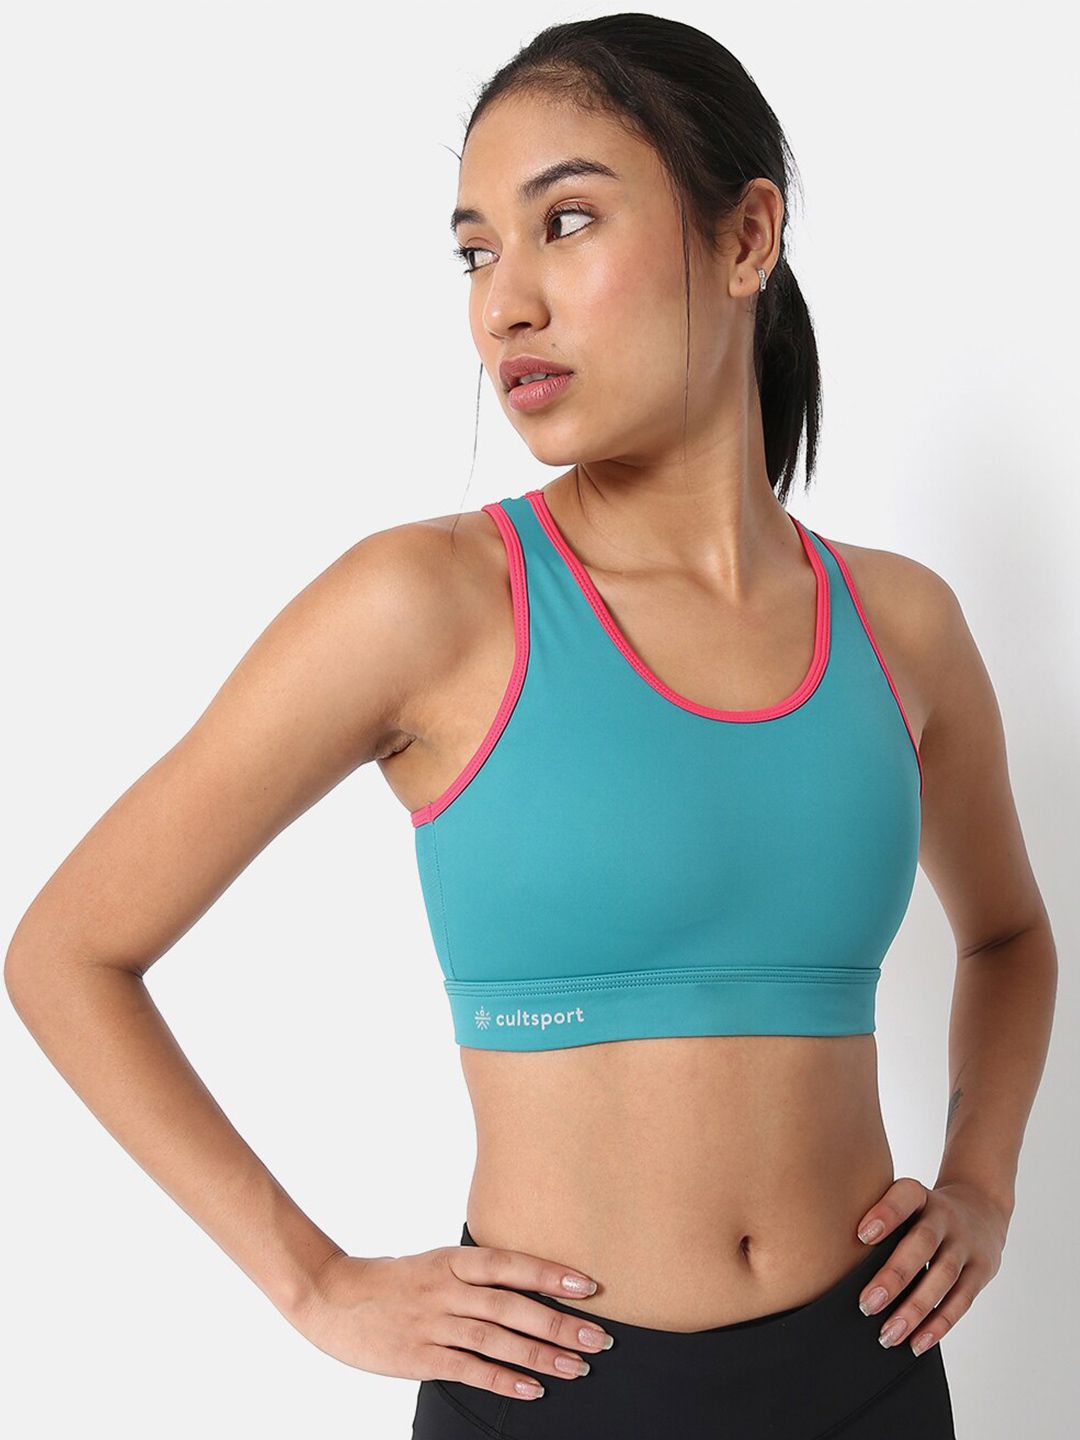 Cultsport Teal Workout Bra Price in India